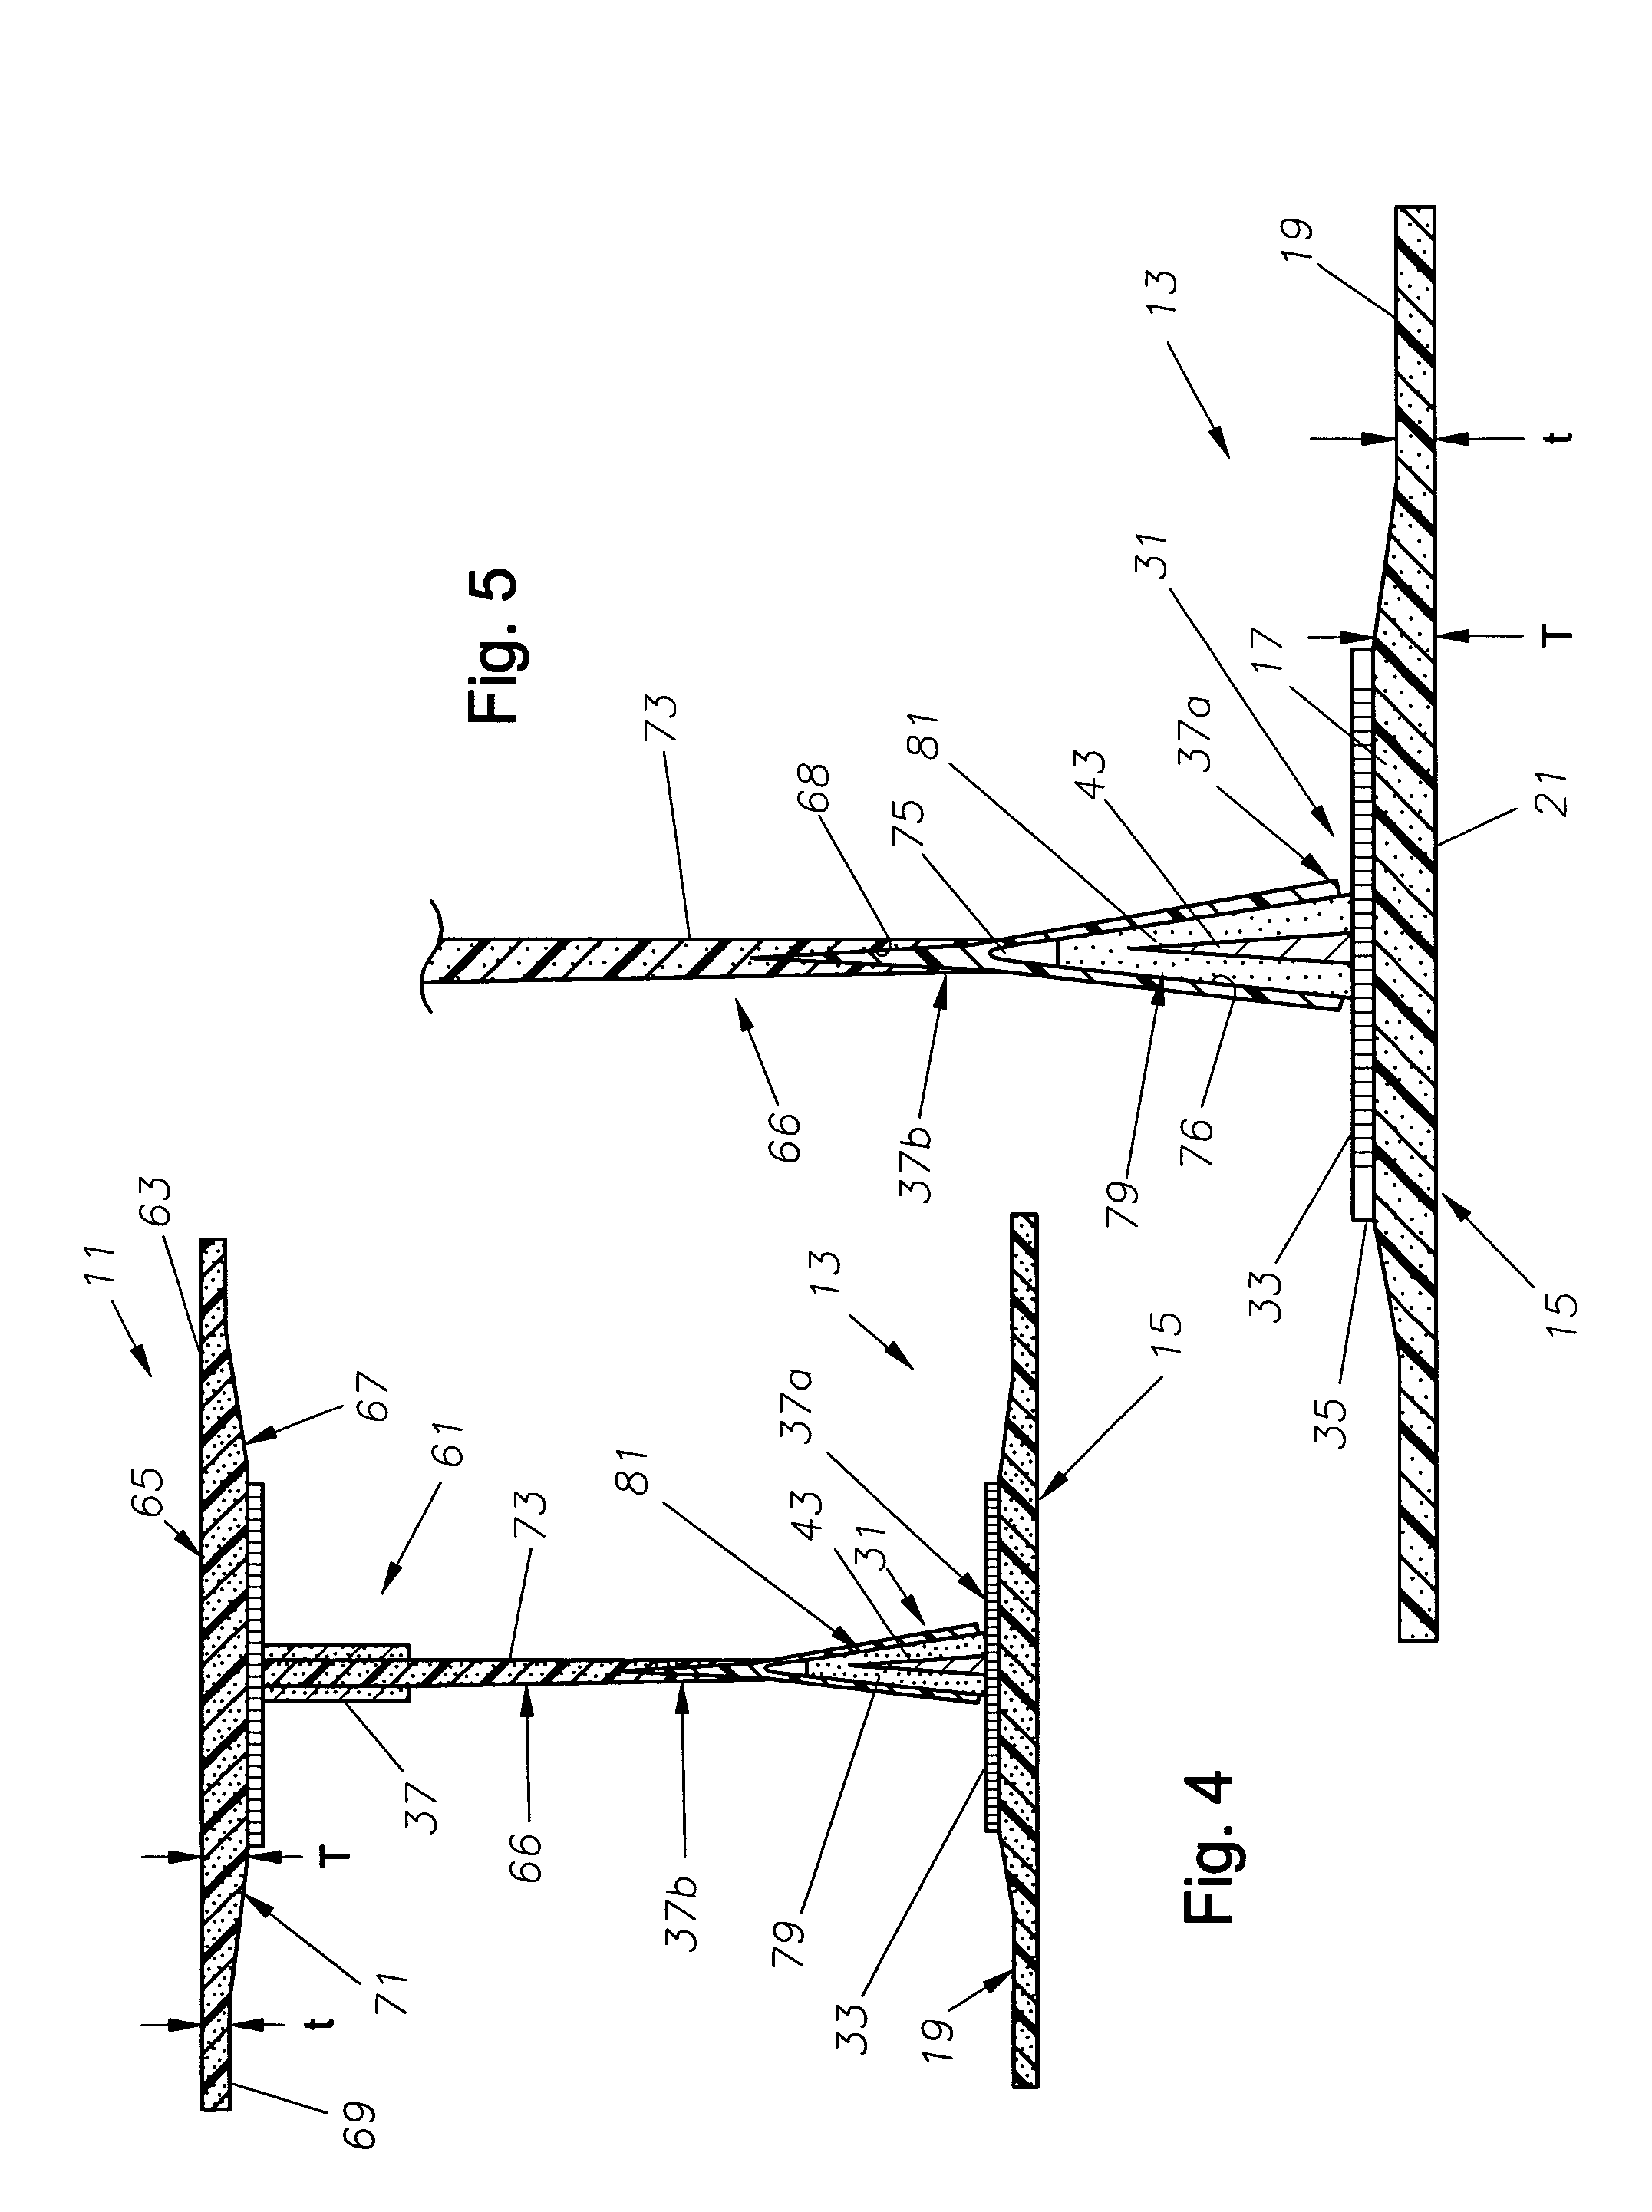 Apparatus, system, and method of joining structural components with a tapered tension bond joint